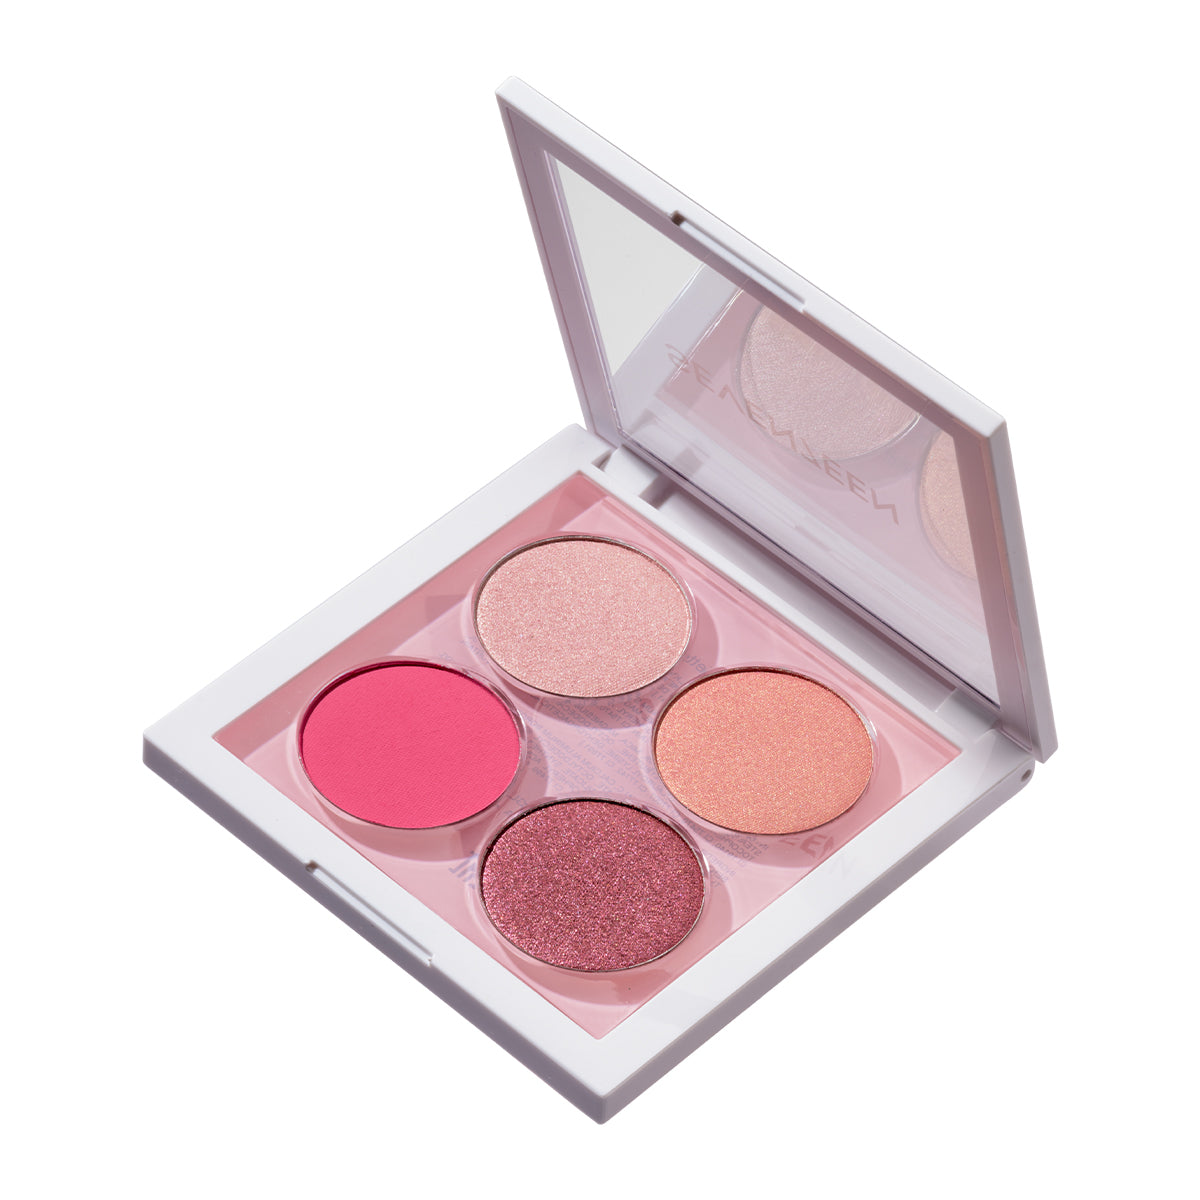 Seventeen Vibrant Eyes Quad Palette No.05 Rosy Nude